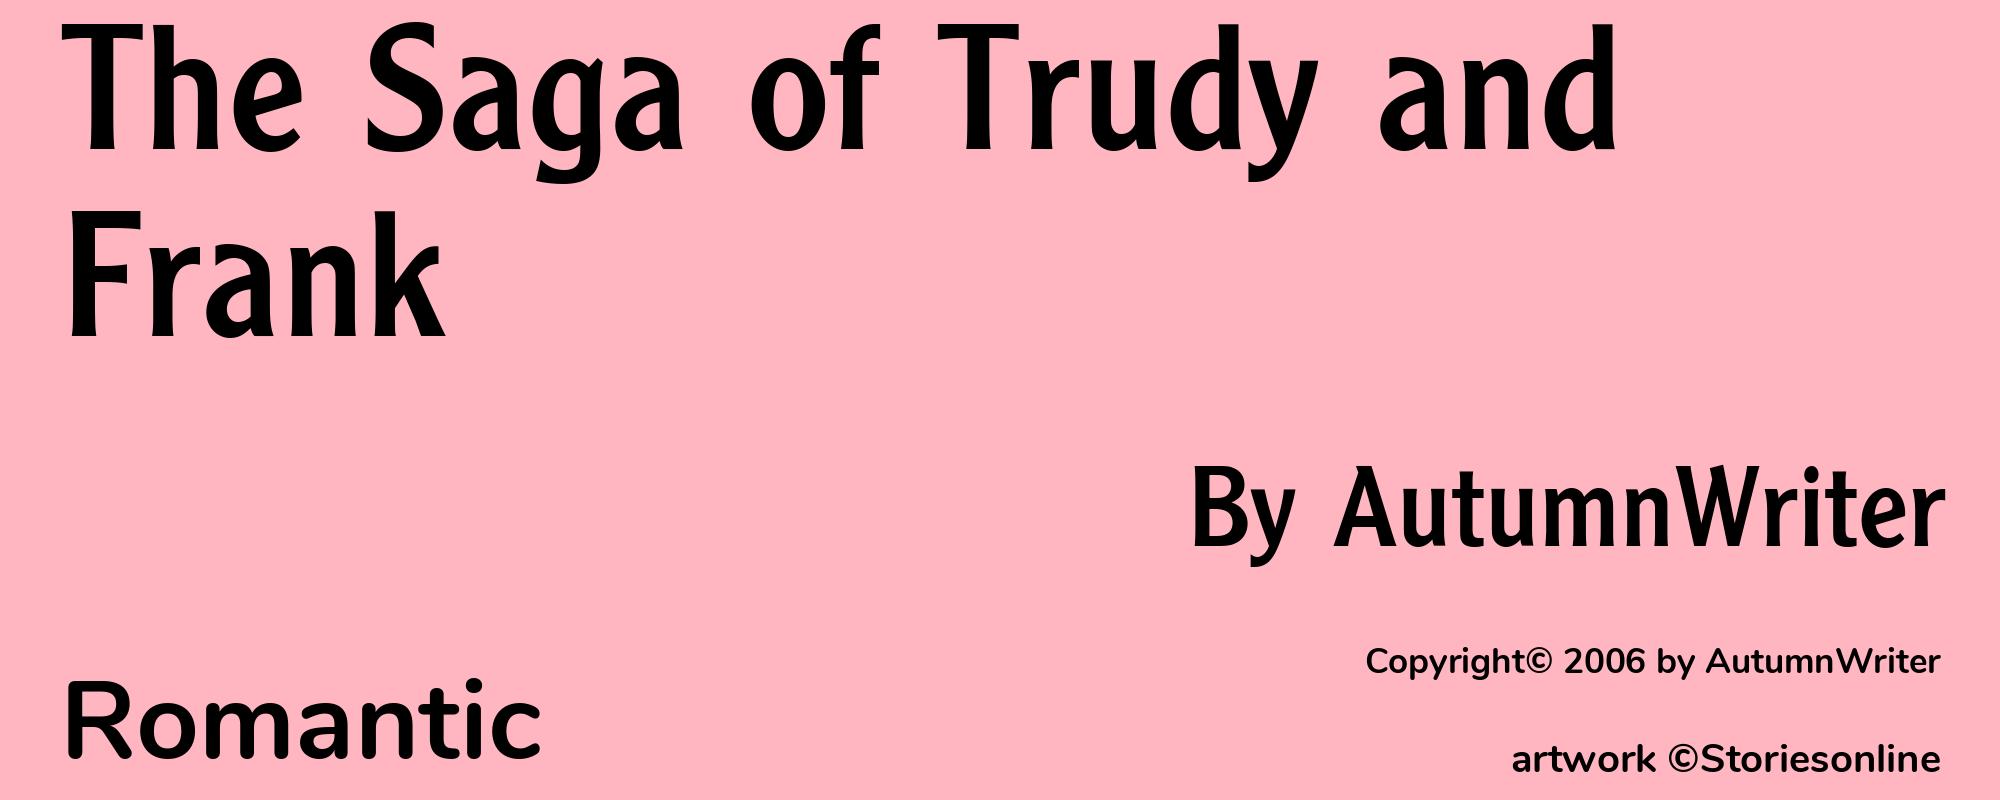 The Saga of Trudy and Frank - Cover